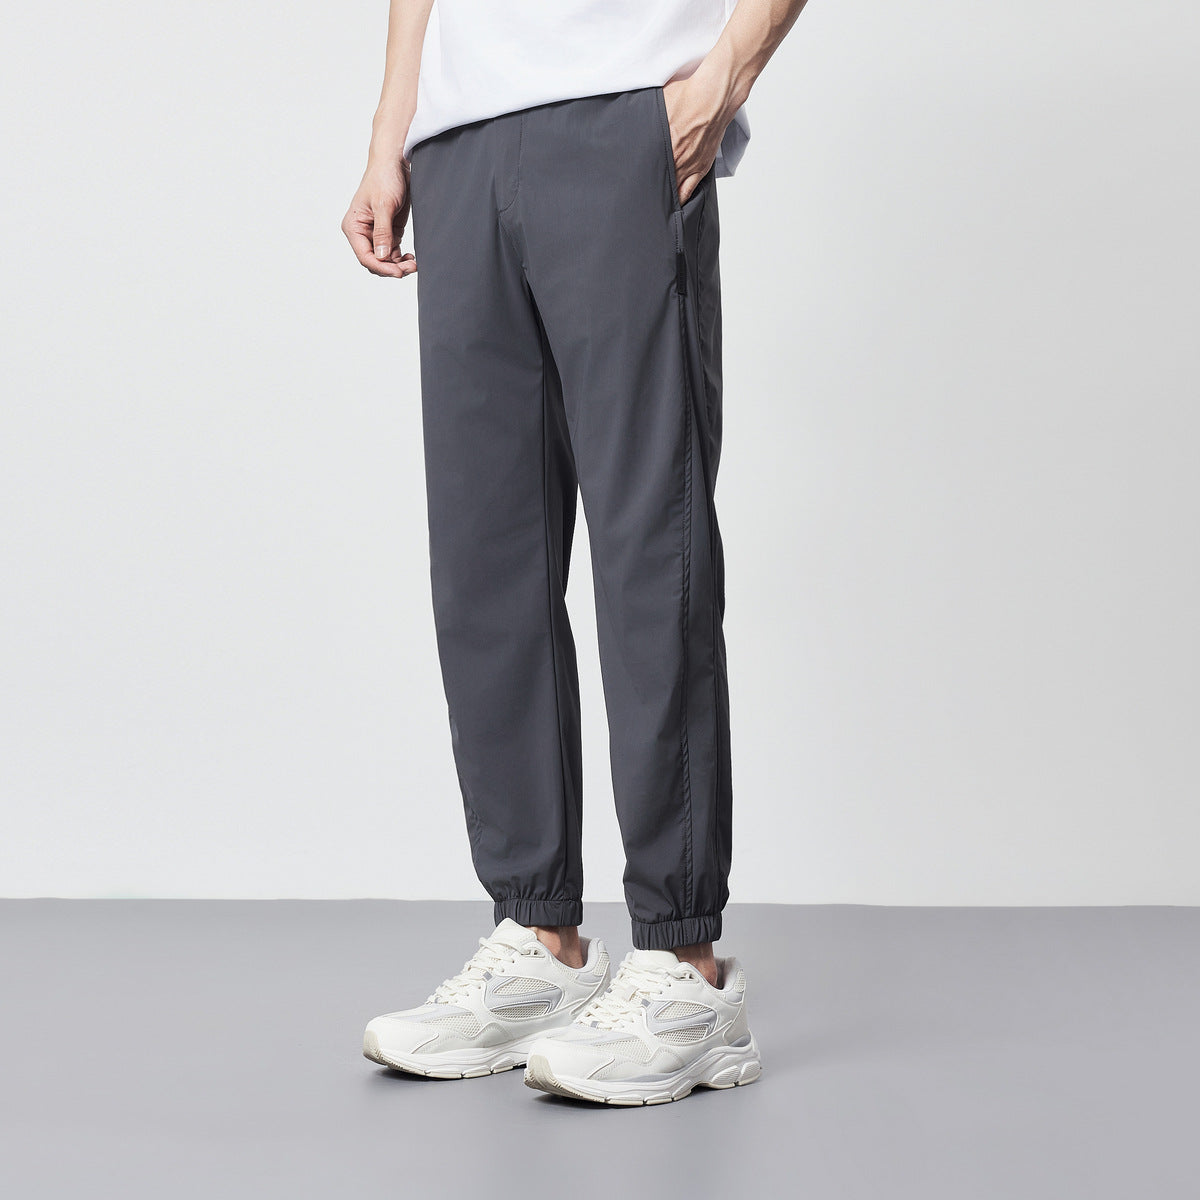 Ice Silk Cool Thin Casual Pants Ankle-Length Pants for Men